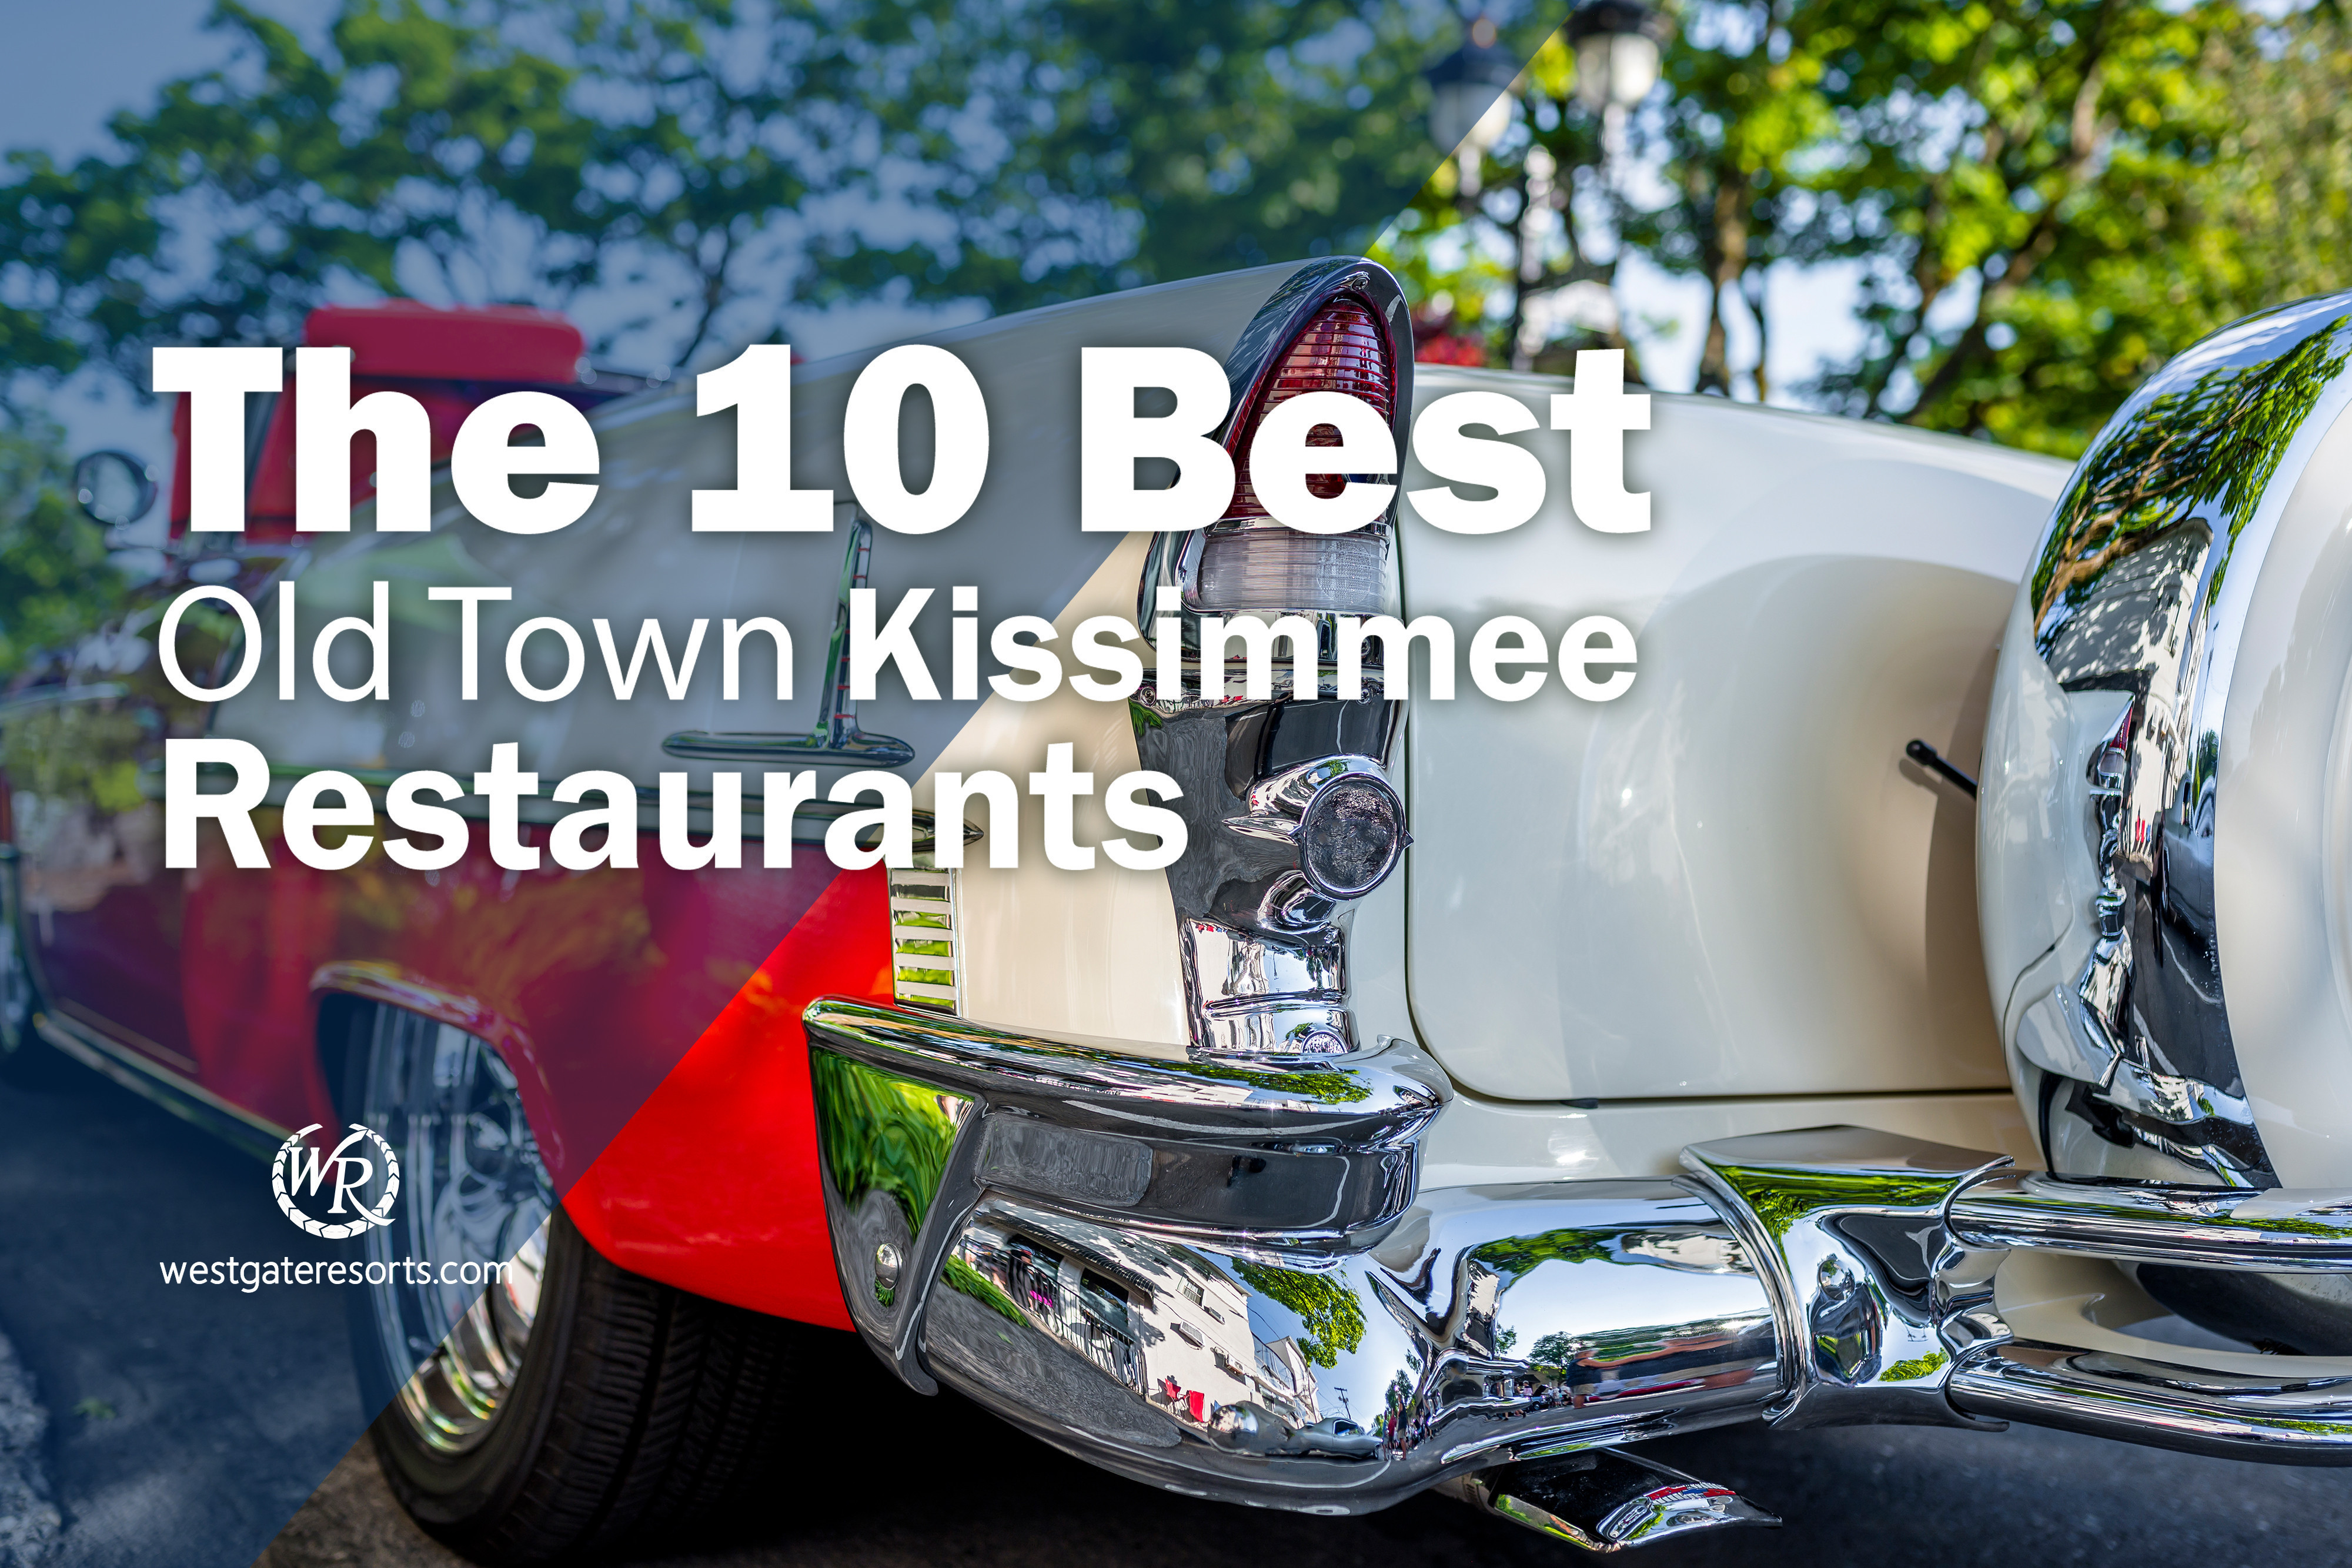 The 10 Best Old Town Kissimmee Restaurants